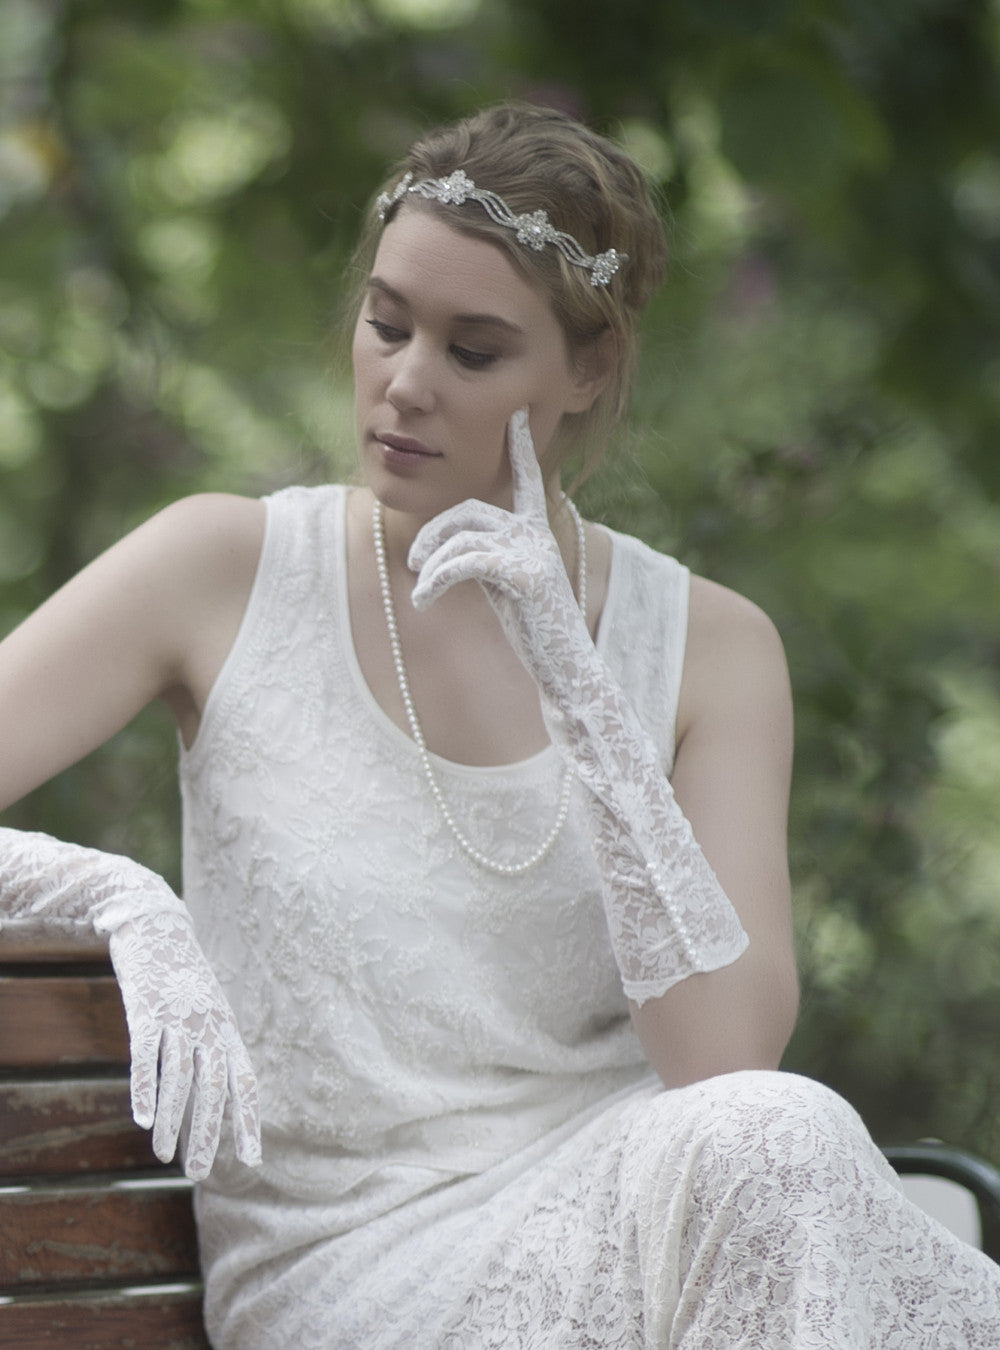 Wedding Gloves, Ivory Gloves, Long Lace Gloves with Pearl Jewelry